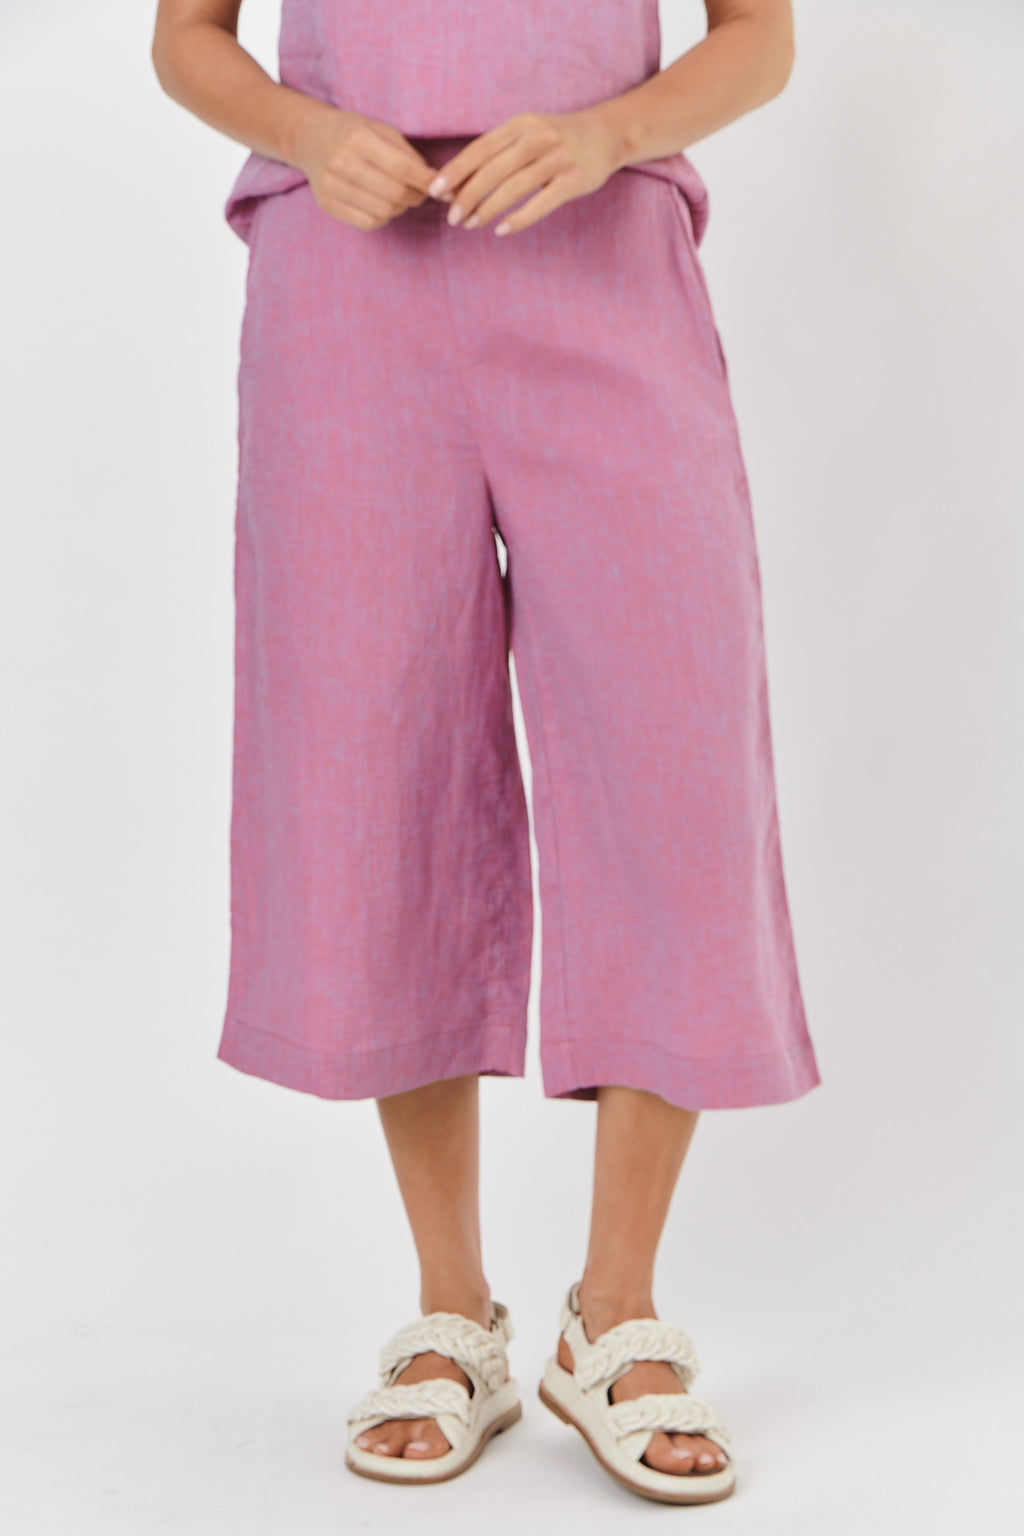 Naturals by O & J Cropped Linen Pants in Taffy GA438